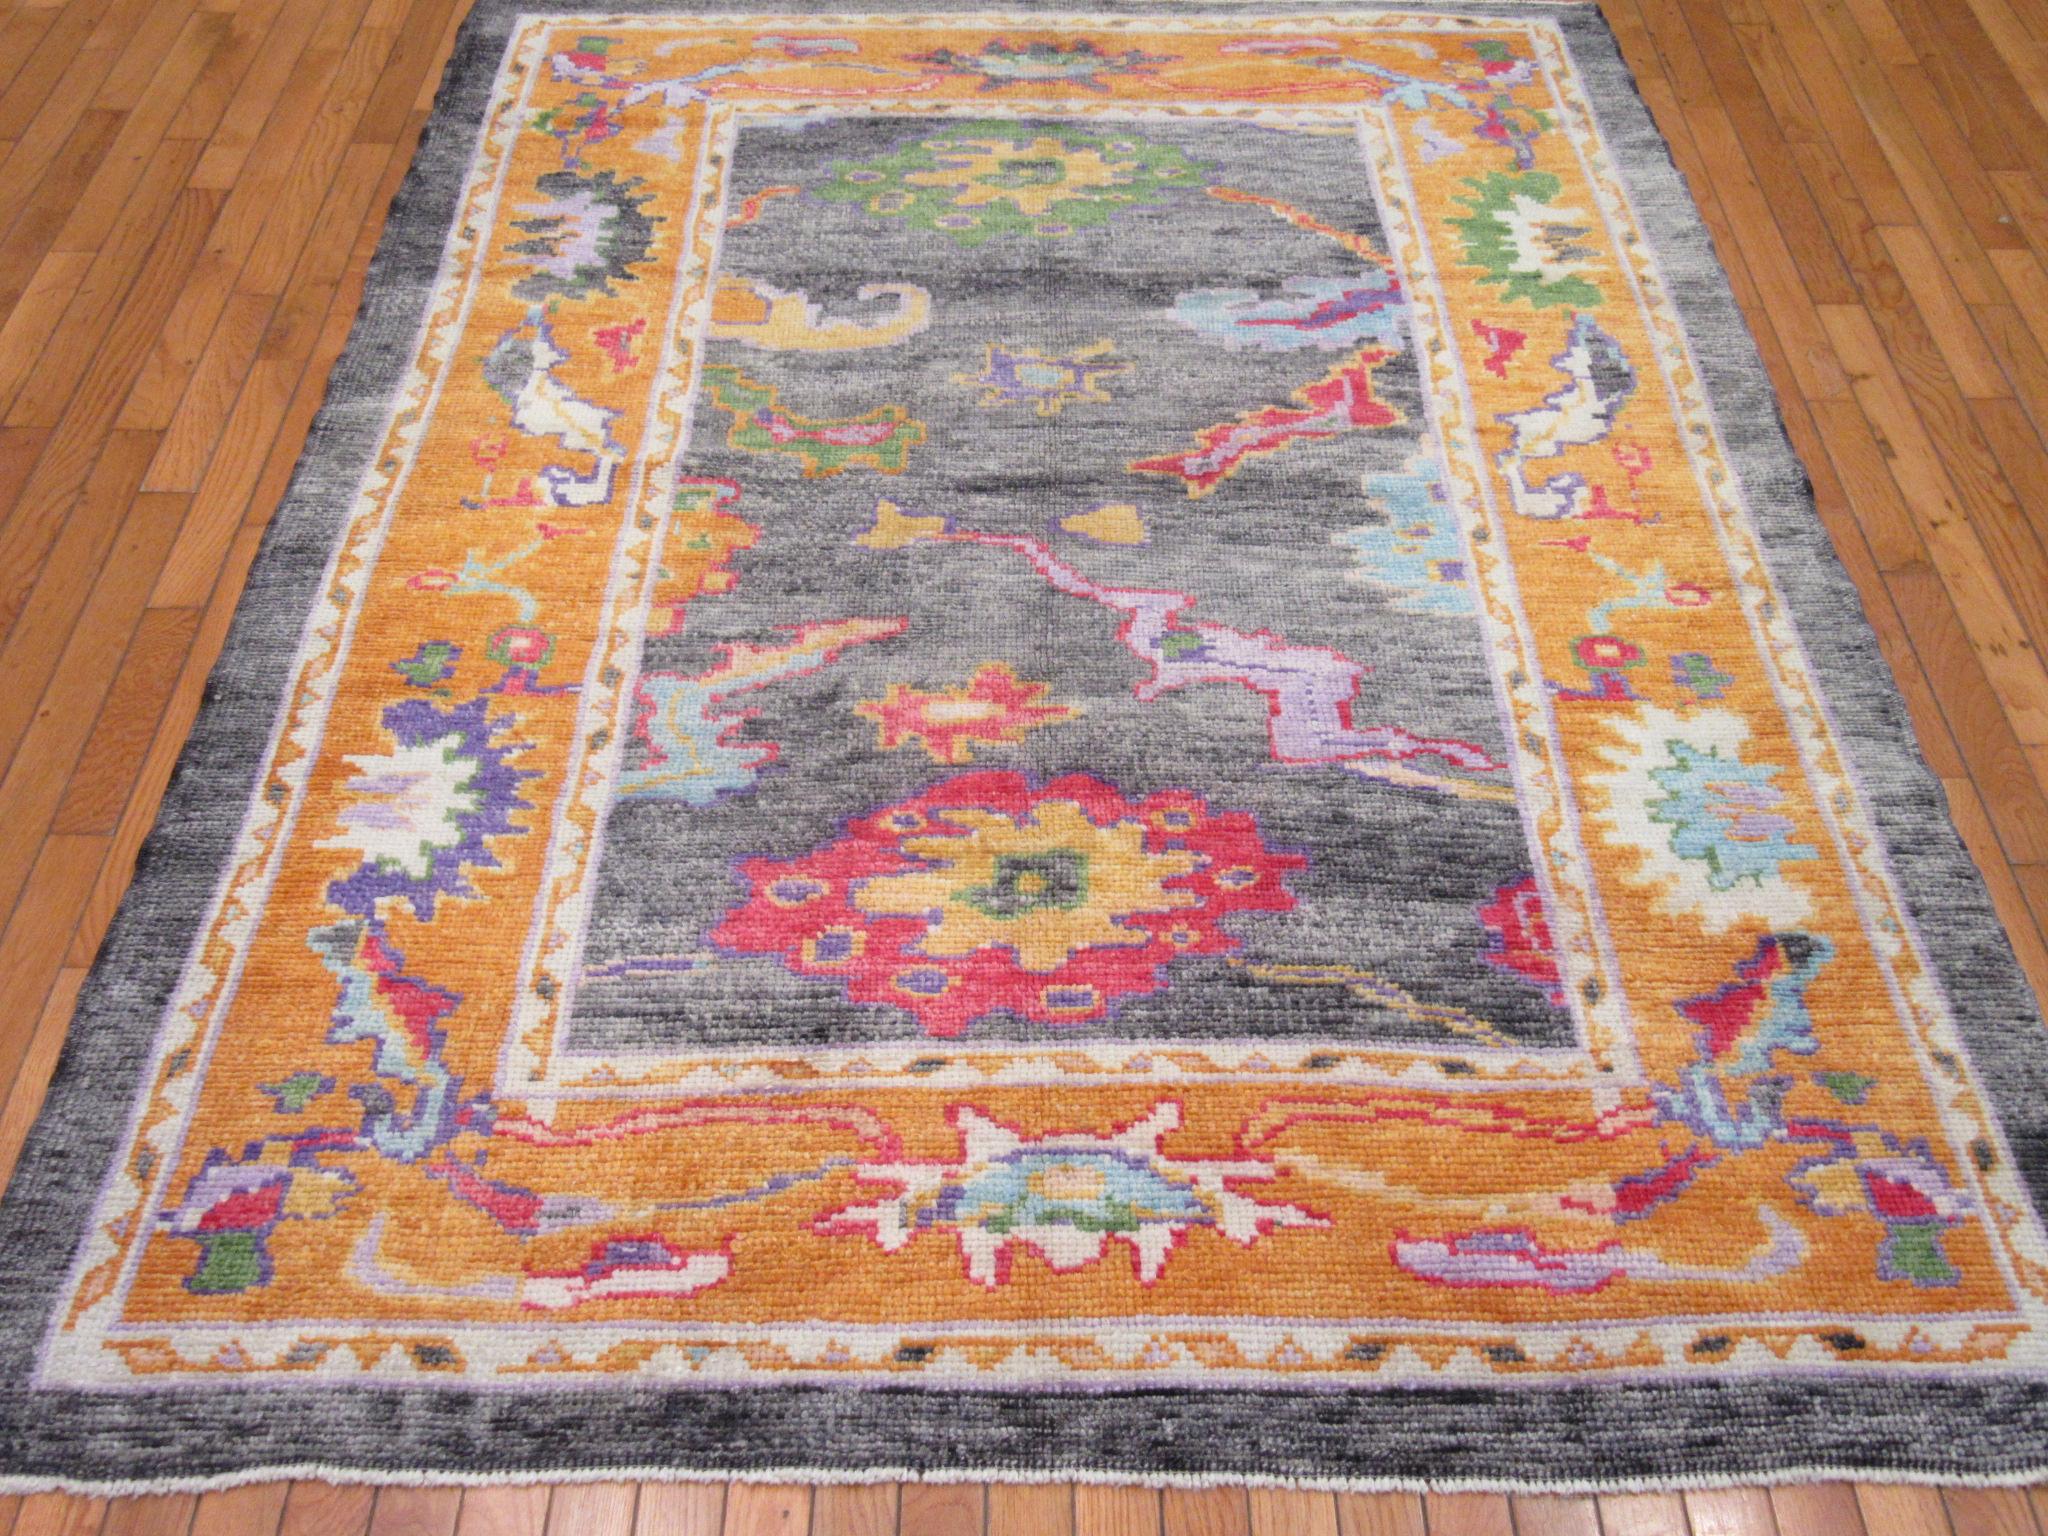 This is a small hand-knotted Oushak design rug from Turkey. It is made with fine Turkish wool colored with all natural dyes. It is a less formal rugs for any room. The rug measures 5' x 7'.